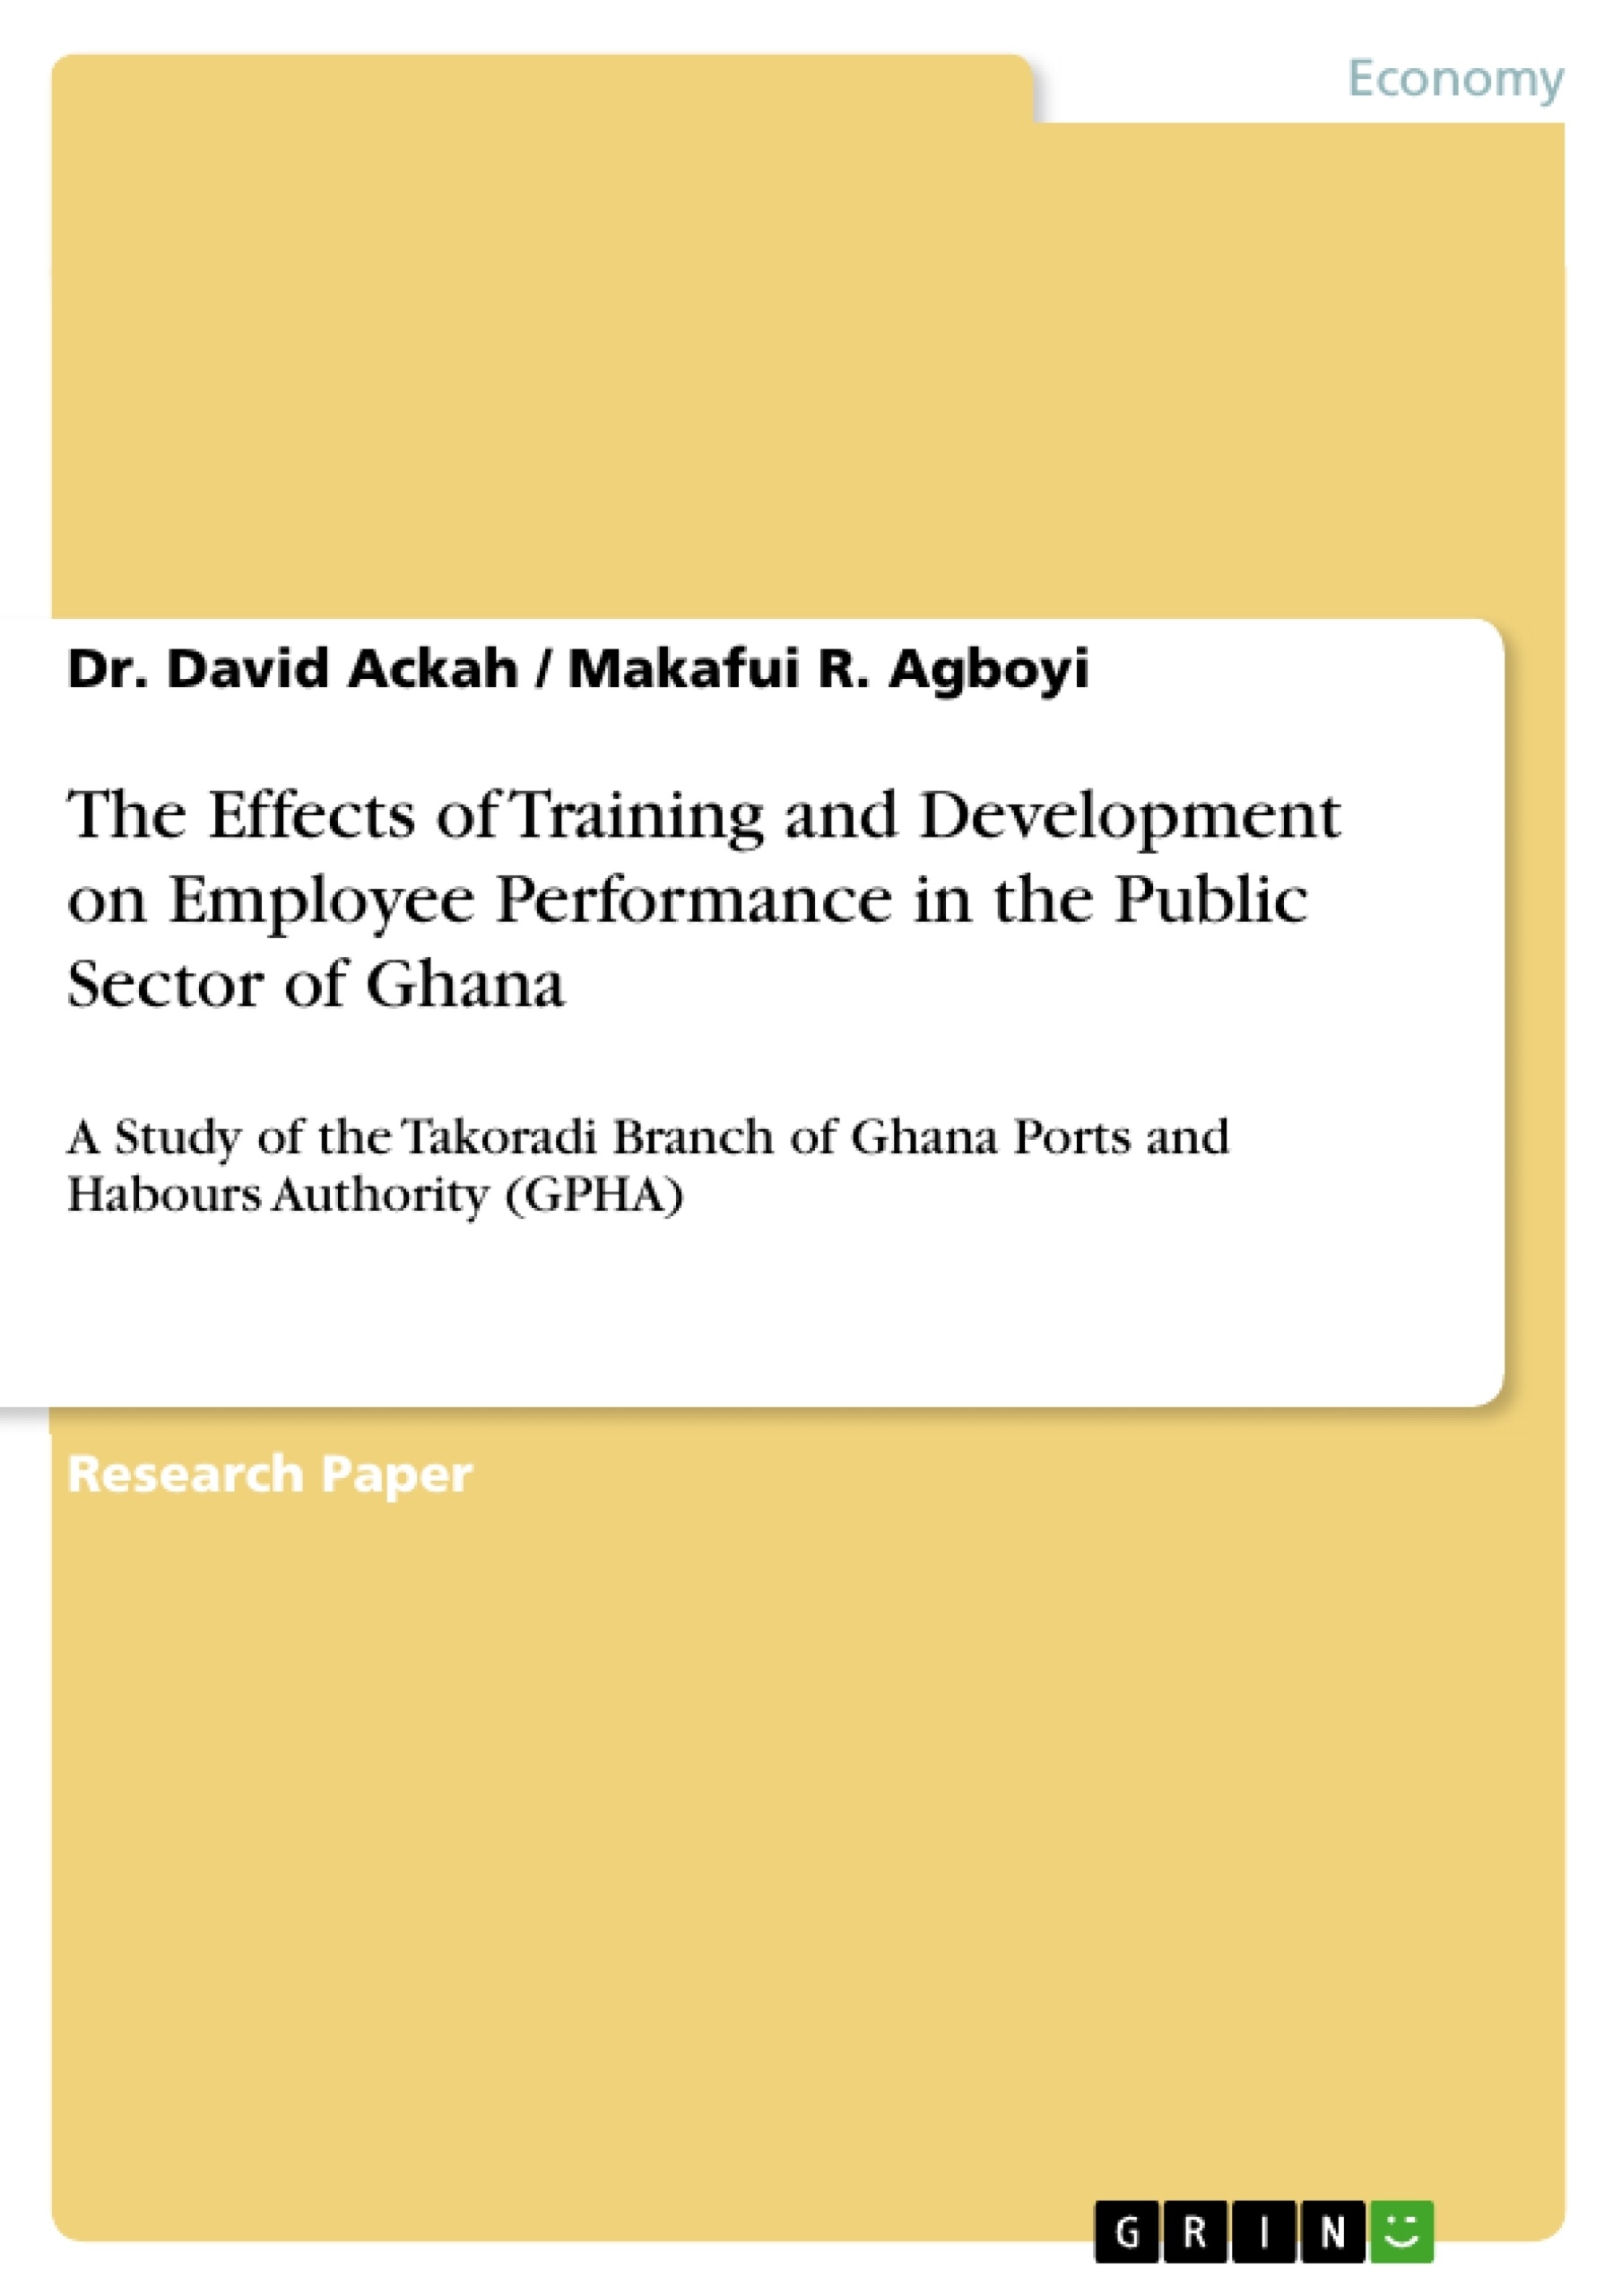 Titel: The Effects of Training and Development on Employee Performance in the Public Sector of Ghana